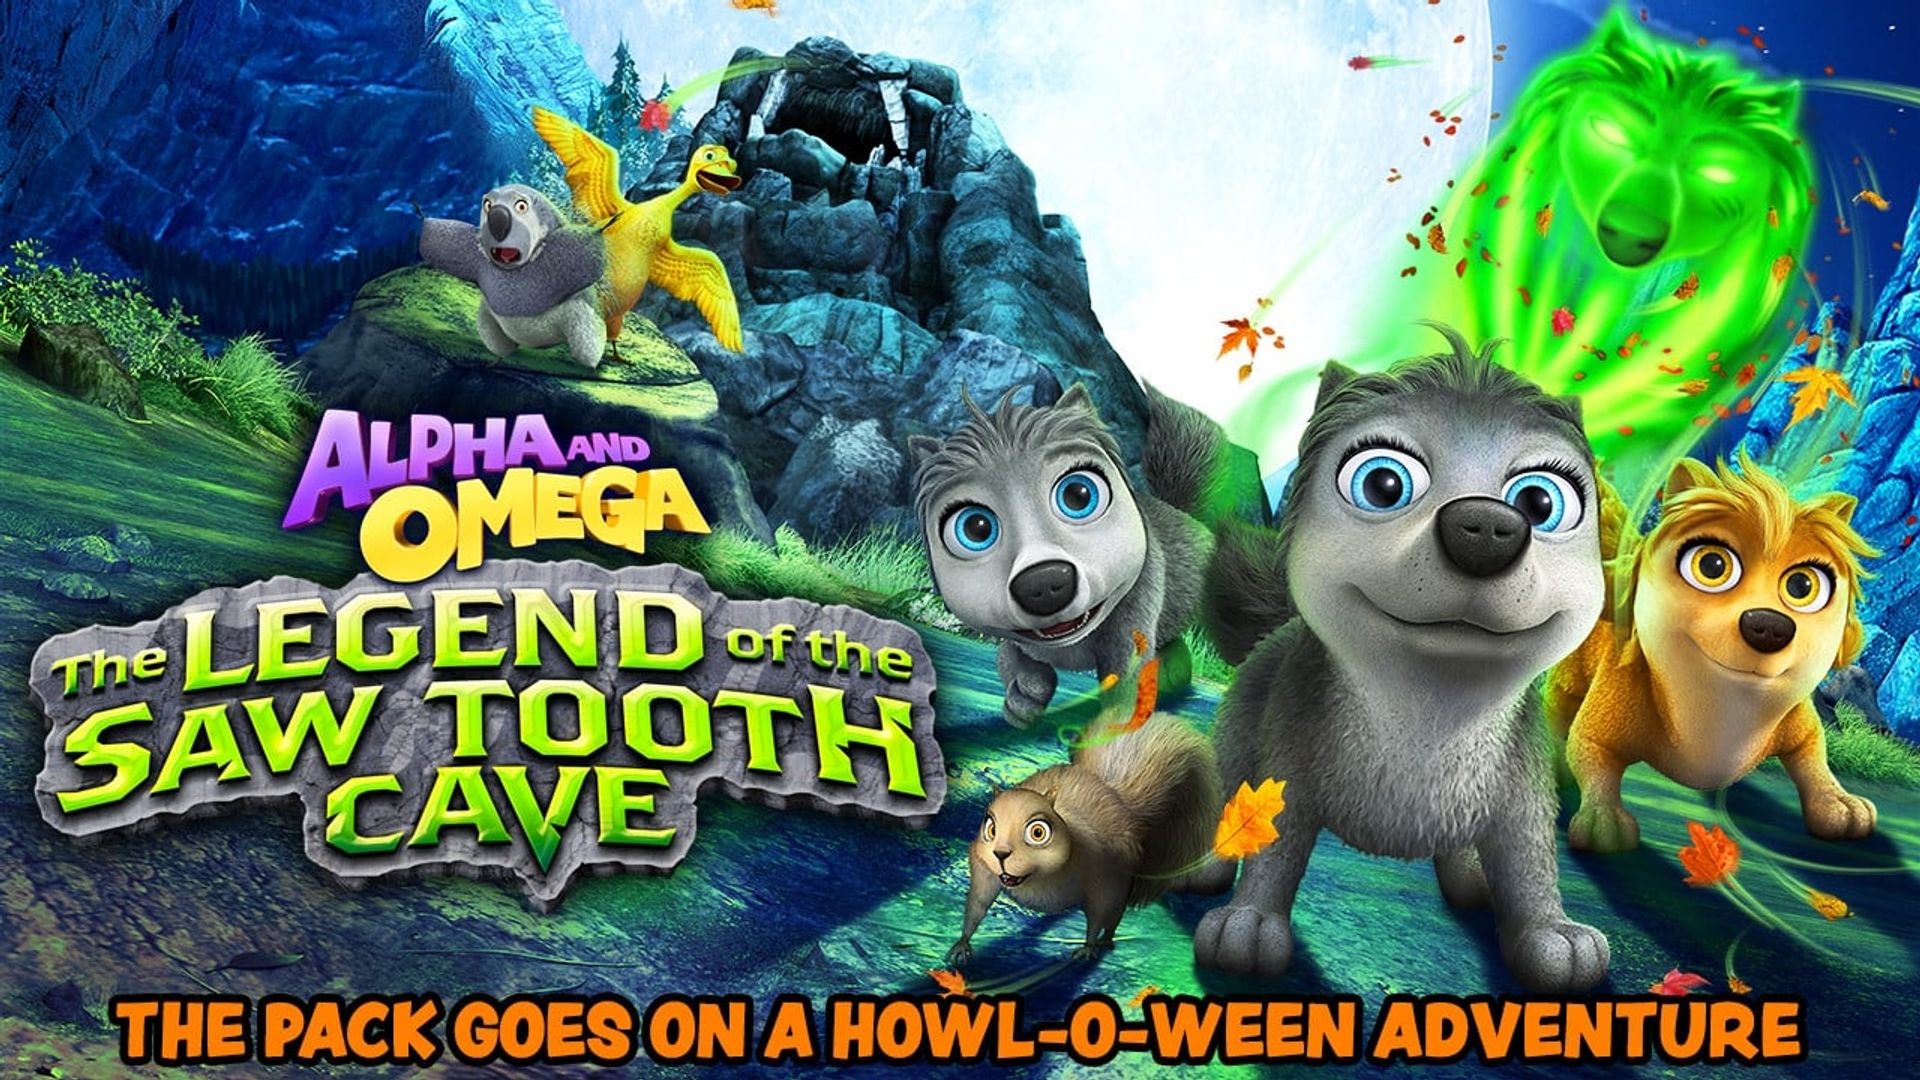 Alpha and Omega 4: The Legend of the Saw Toothed Cave background